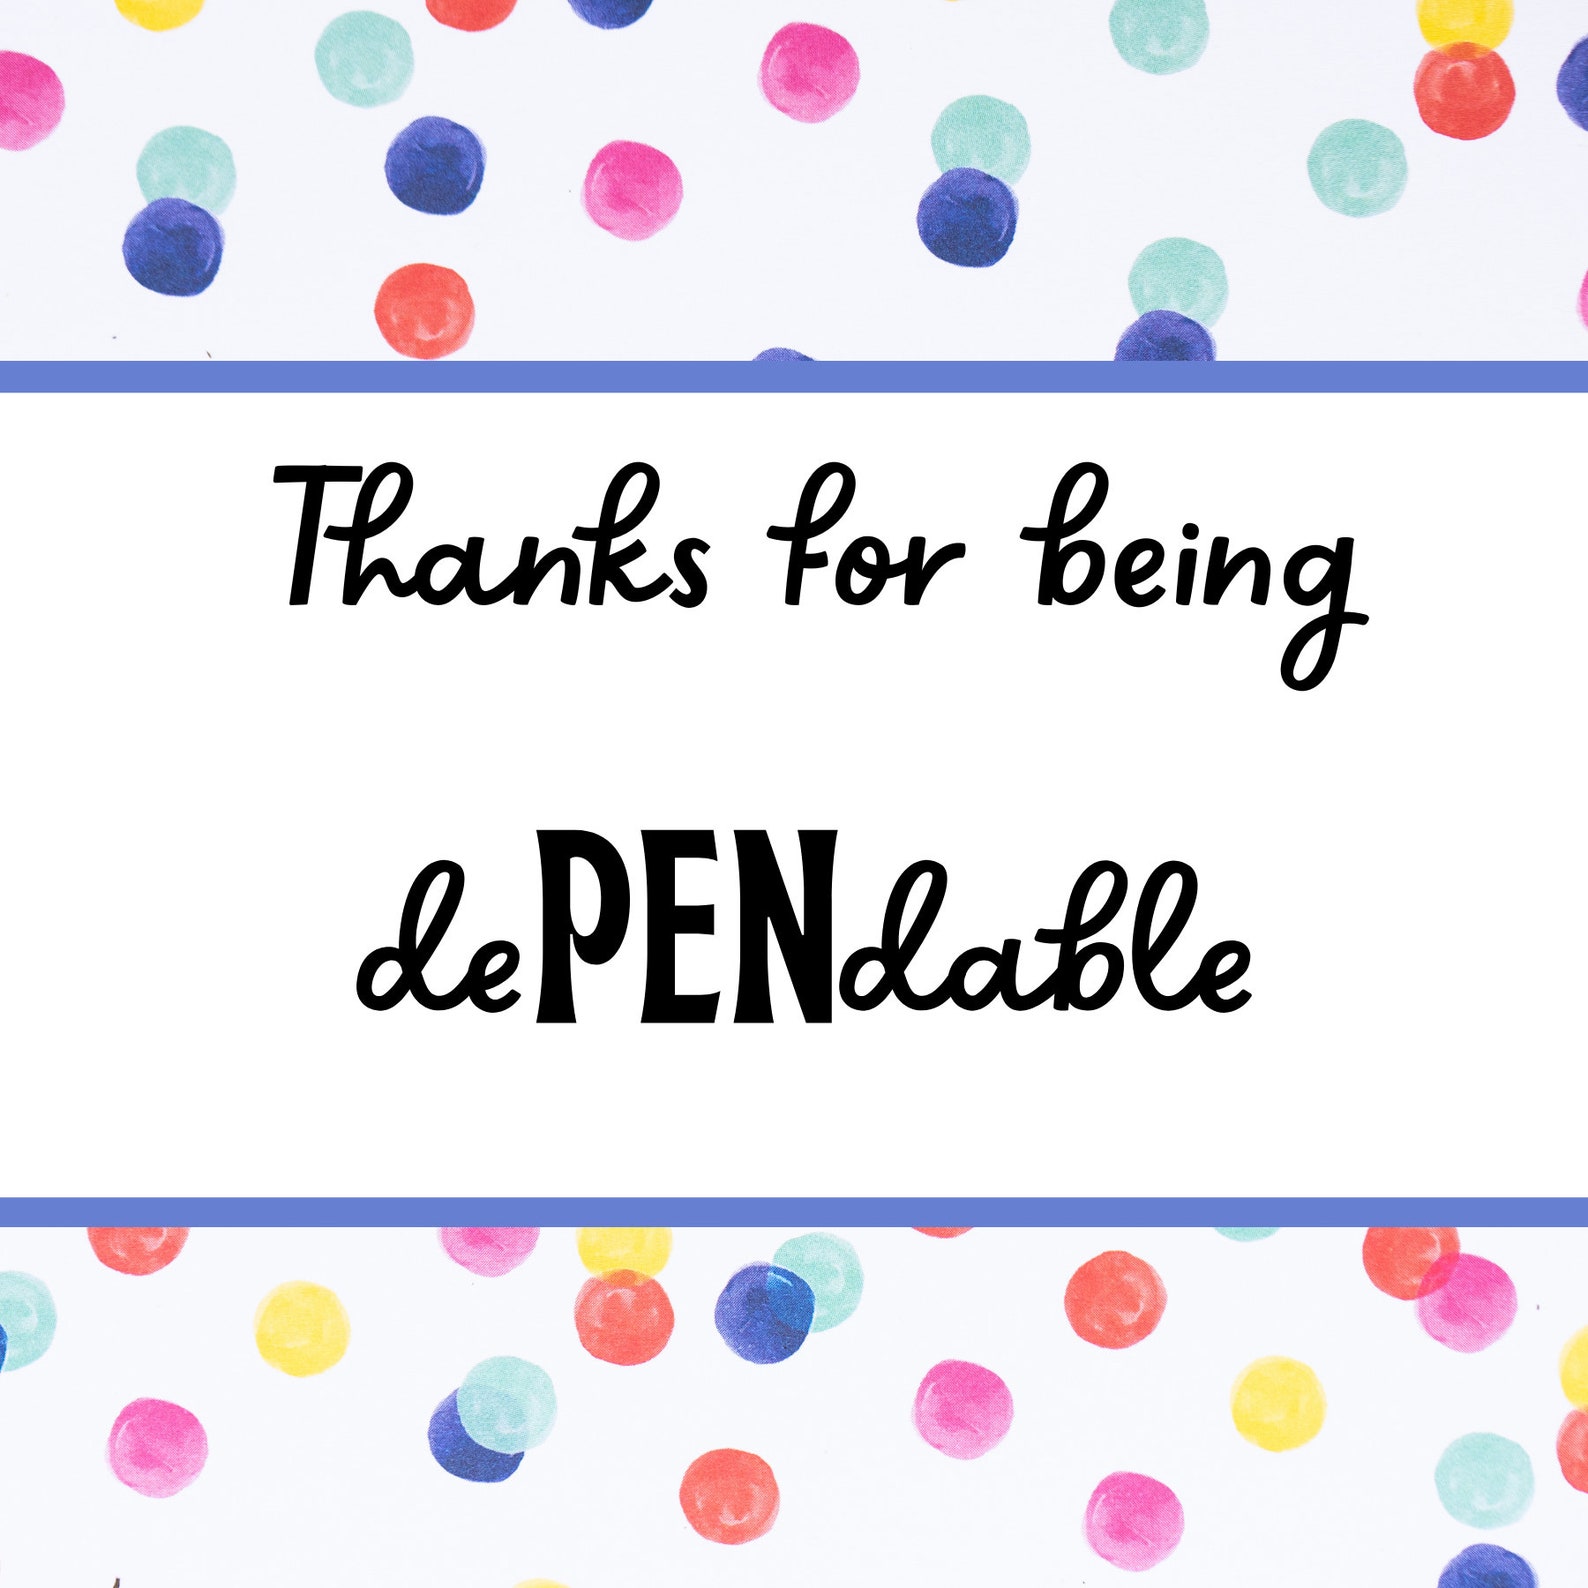 thanks-for-being-dependable-pen-gift-tags-treat-bag-tags-etsy